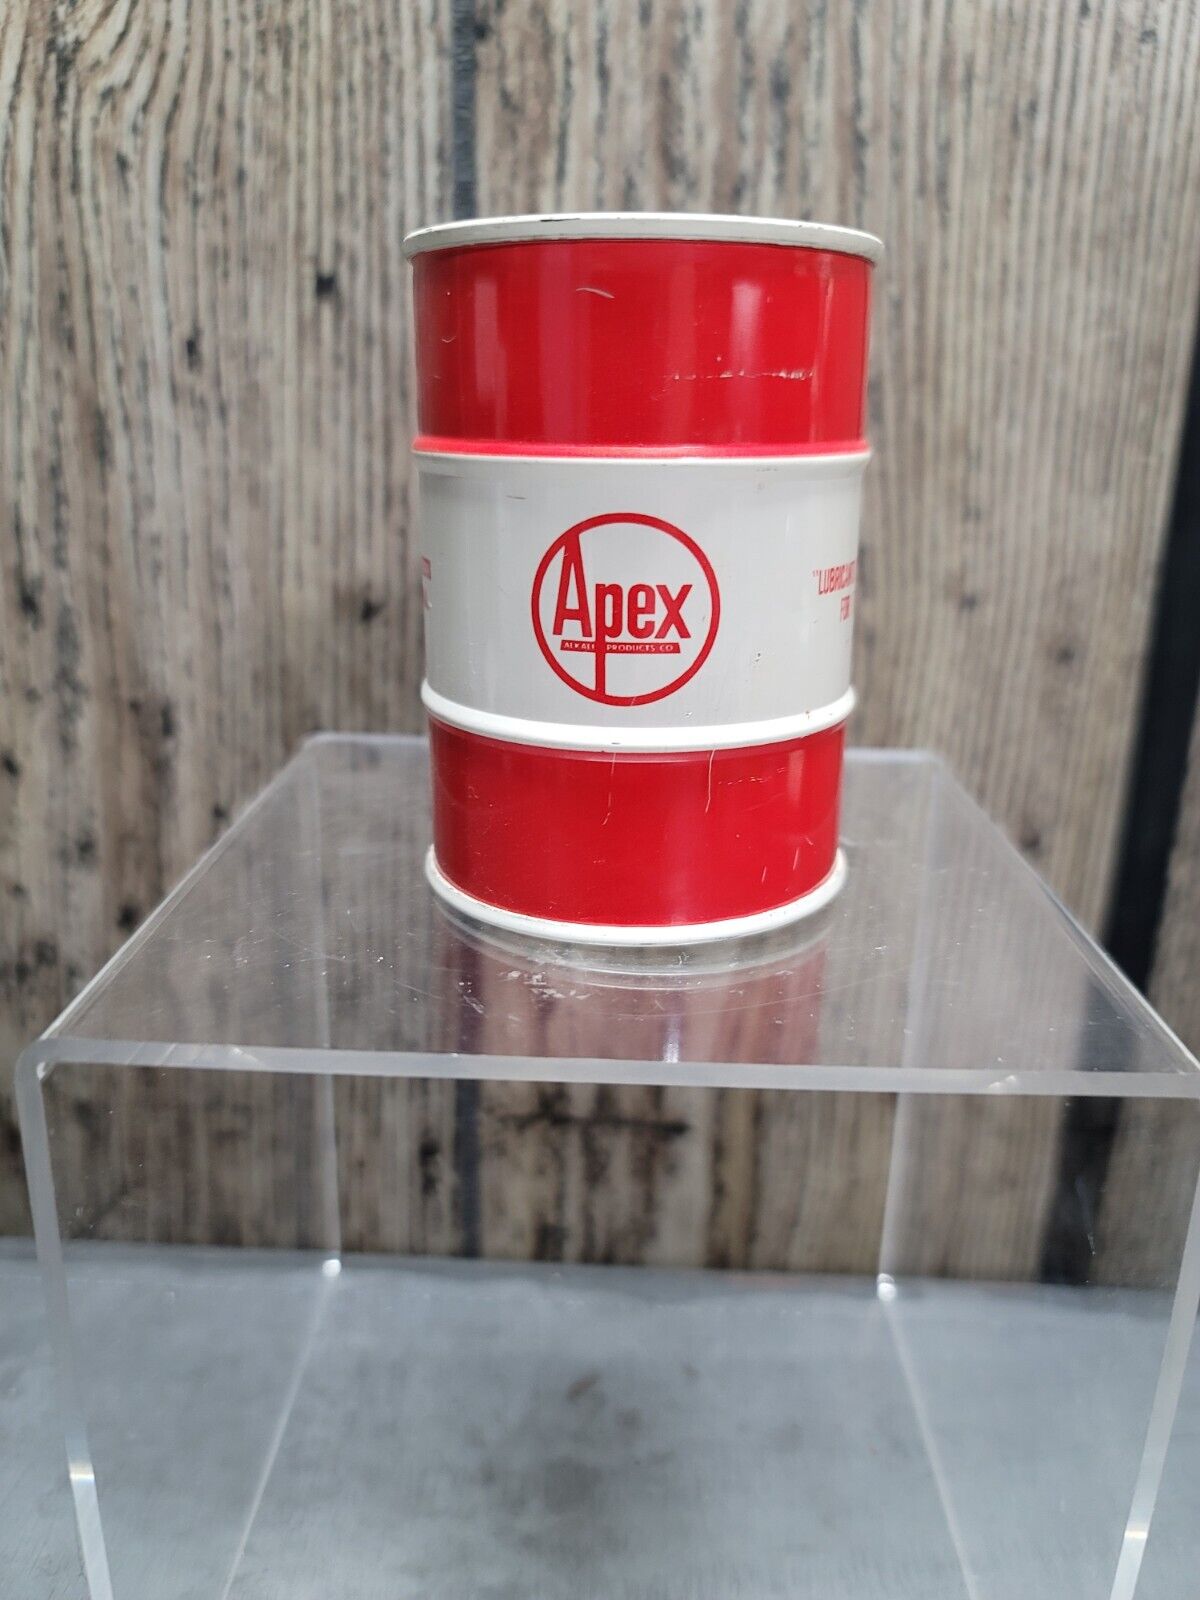 Vintage OIL LUBRICANTS CLEANING PRODUCTS Advertising Coin Bank APEX Philadelphia